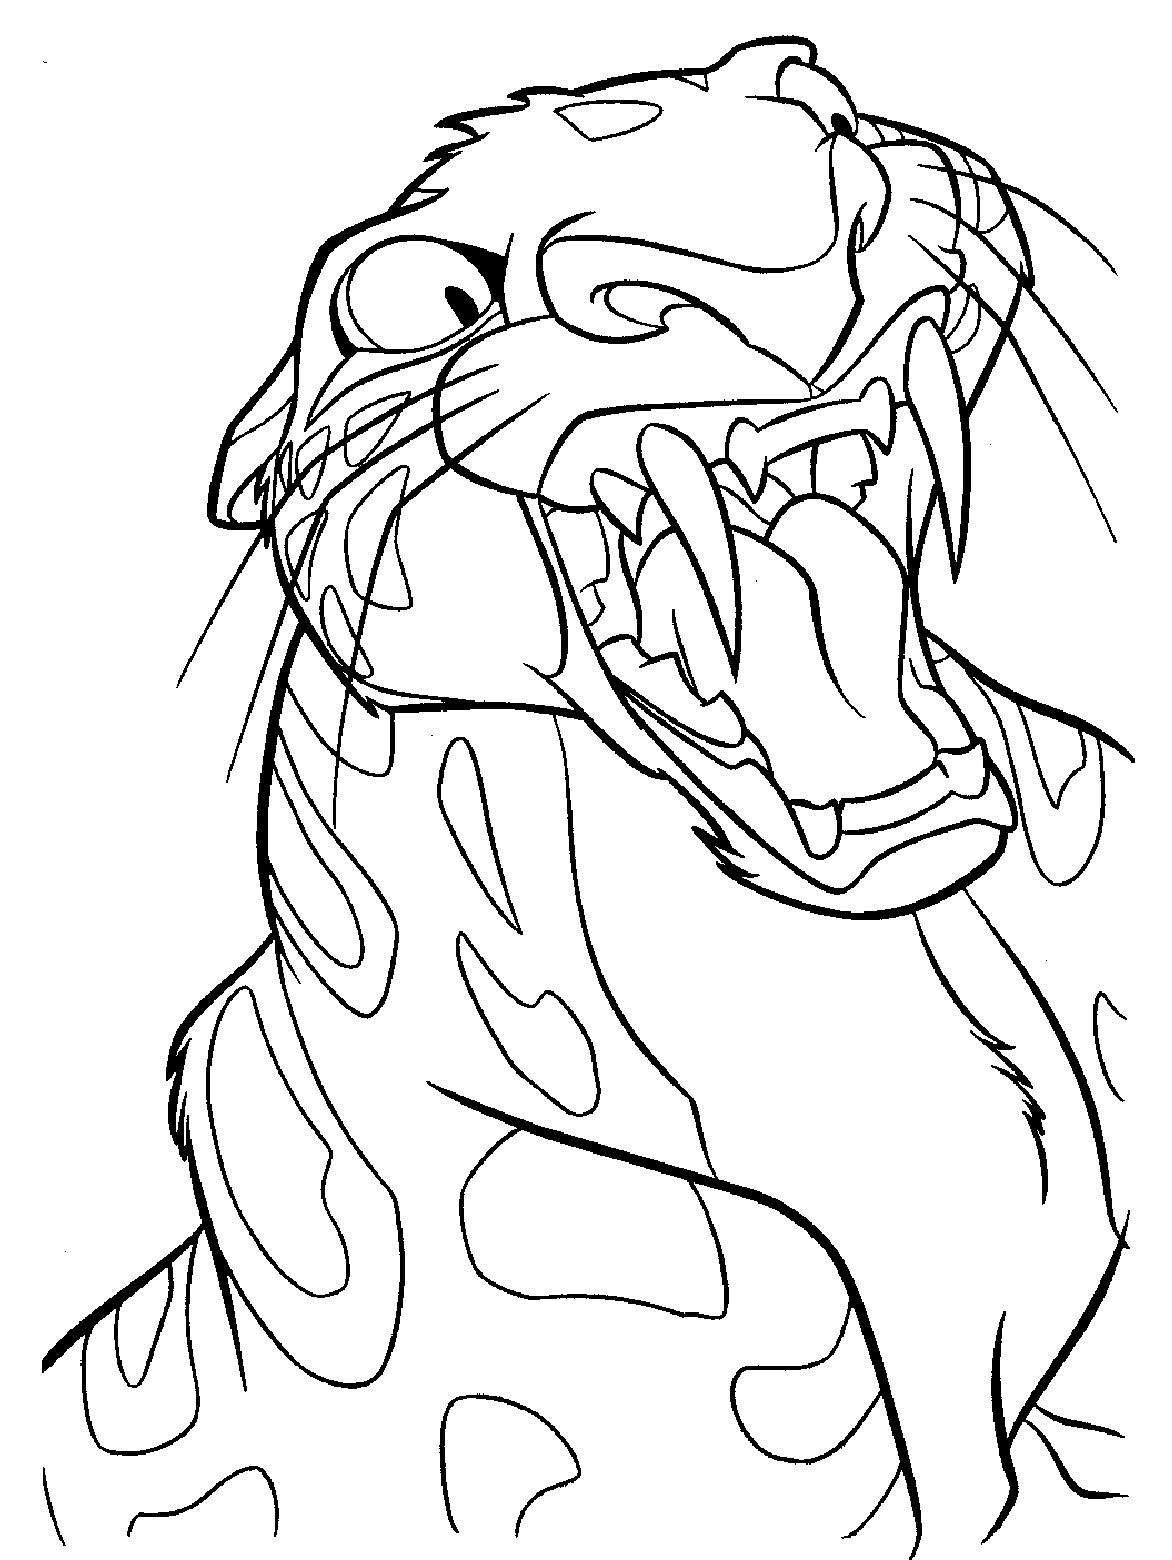 Leopard Sabor from Tarzan Coloring Page